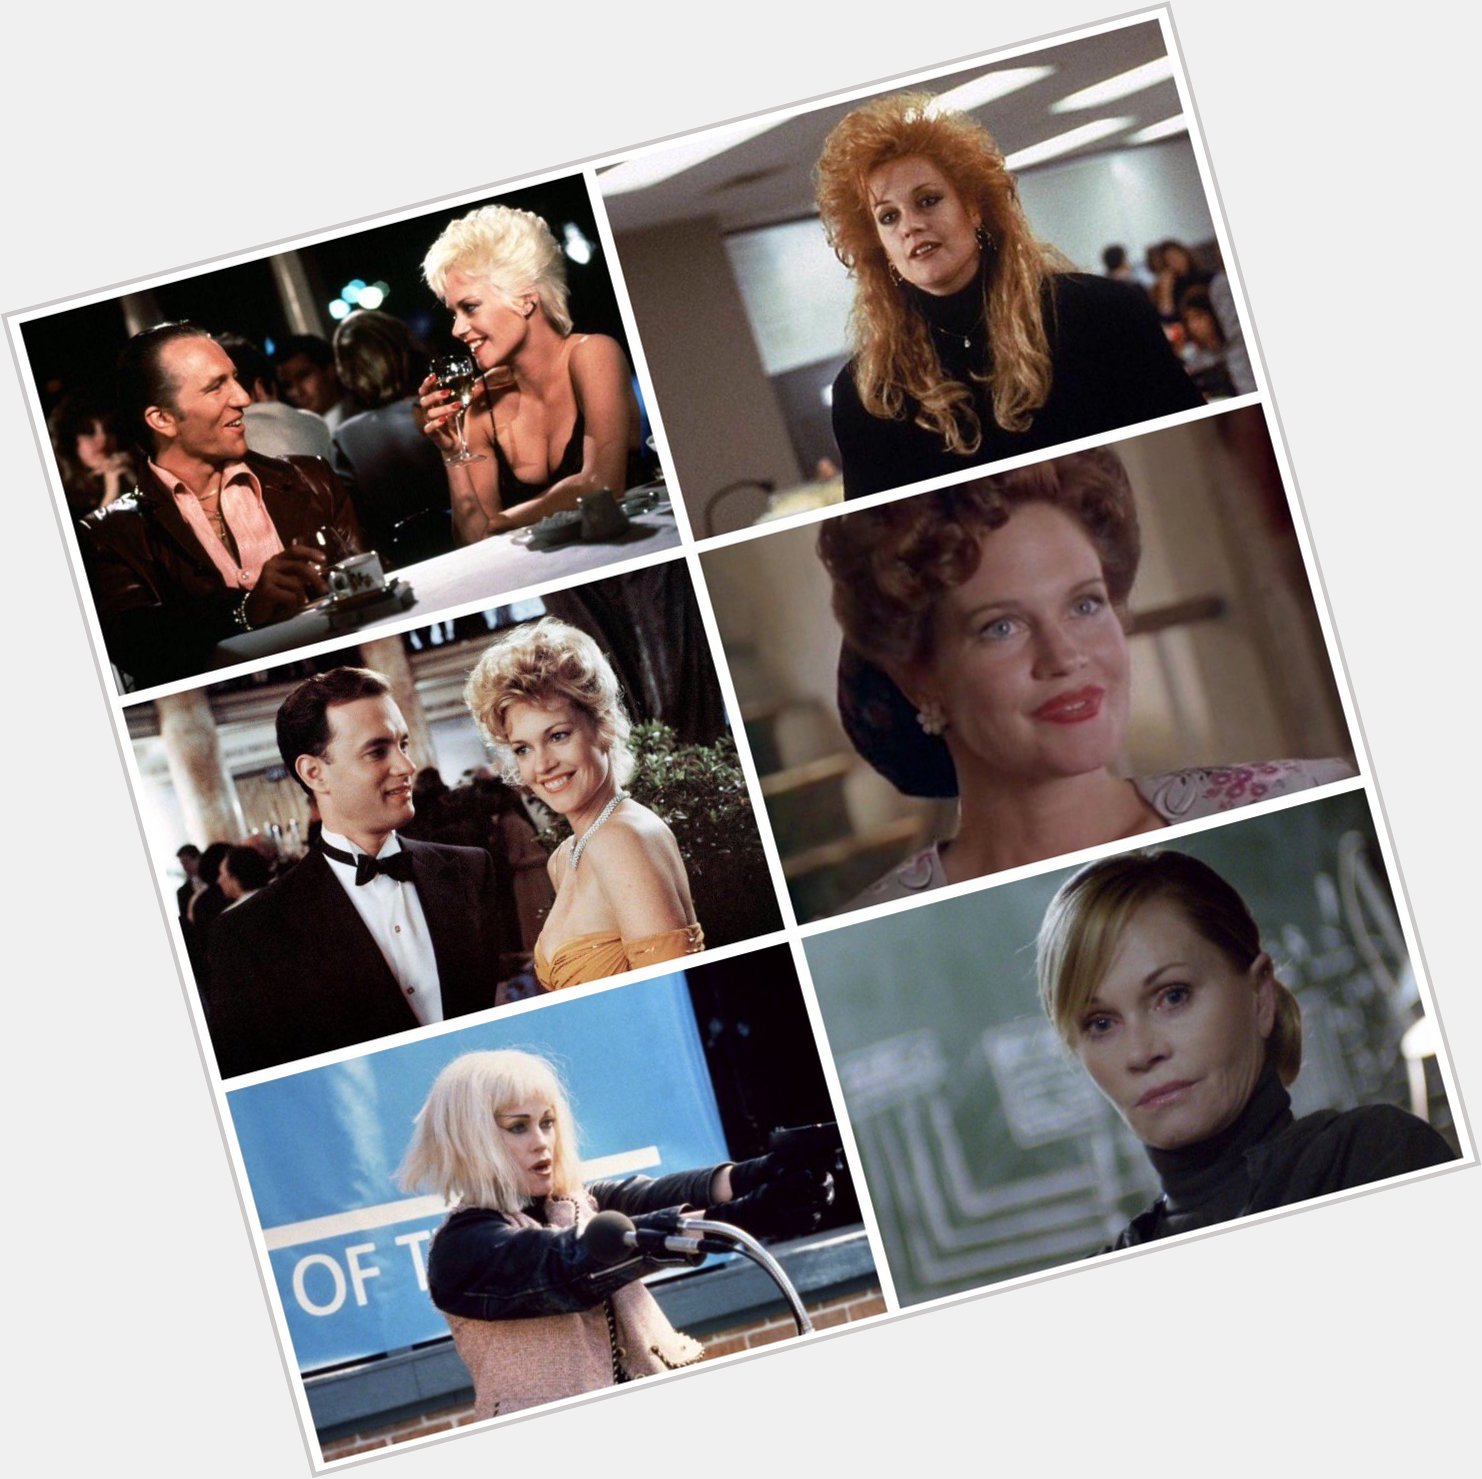  Happy 60th birthday to Melanie Griffith! Some highlights: 